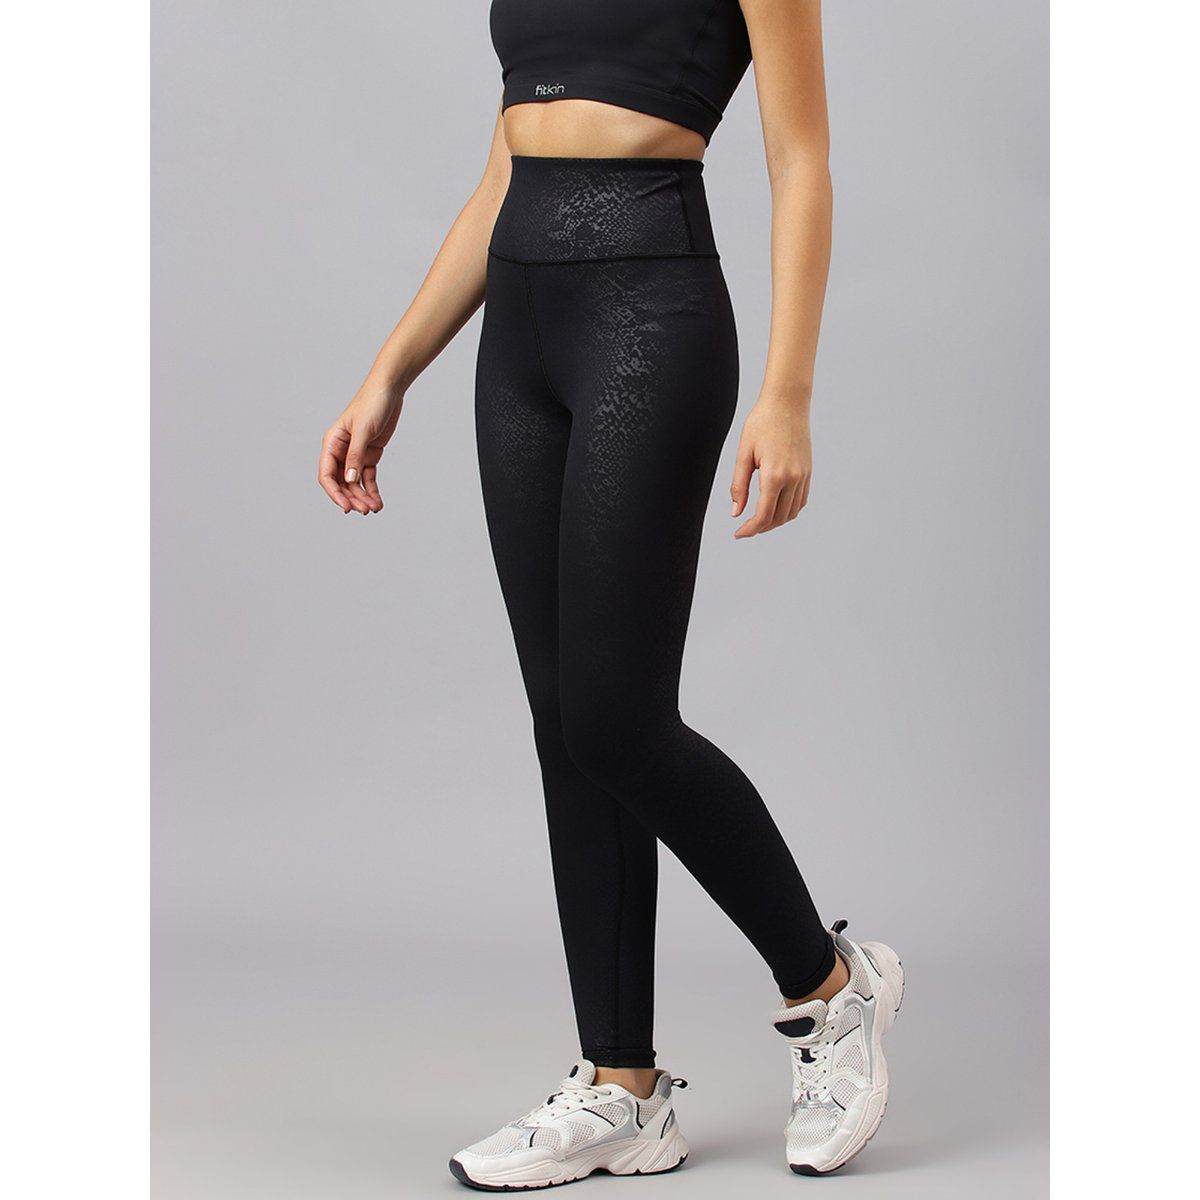 5 Pairs Of Black Leggings That Are A Wardrobe Basic You Will Be Able To  Wear With Anything